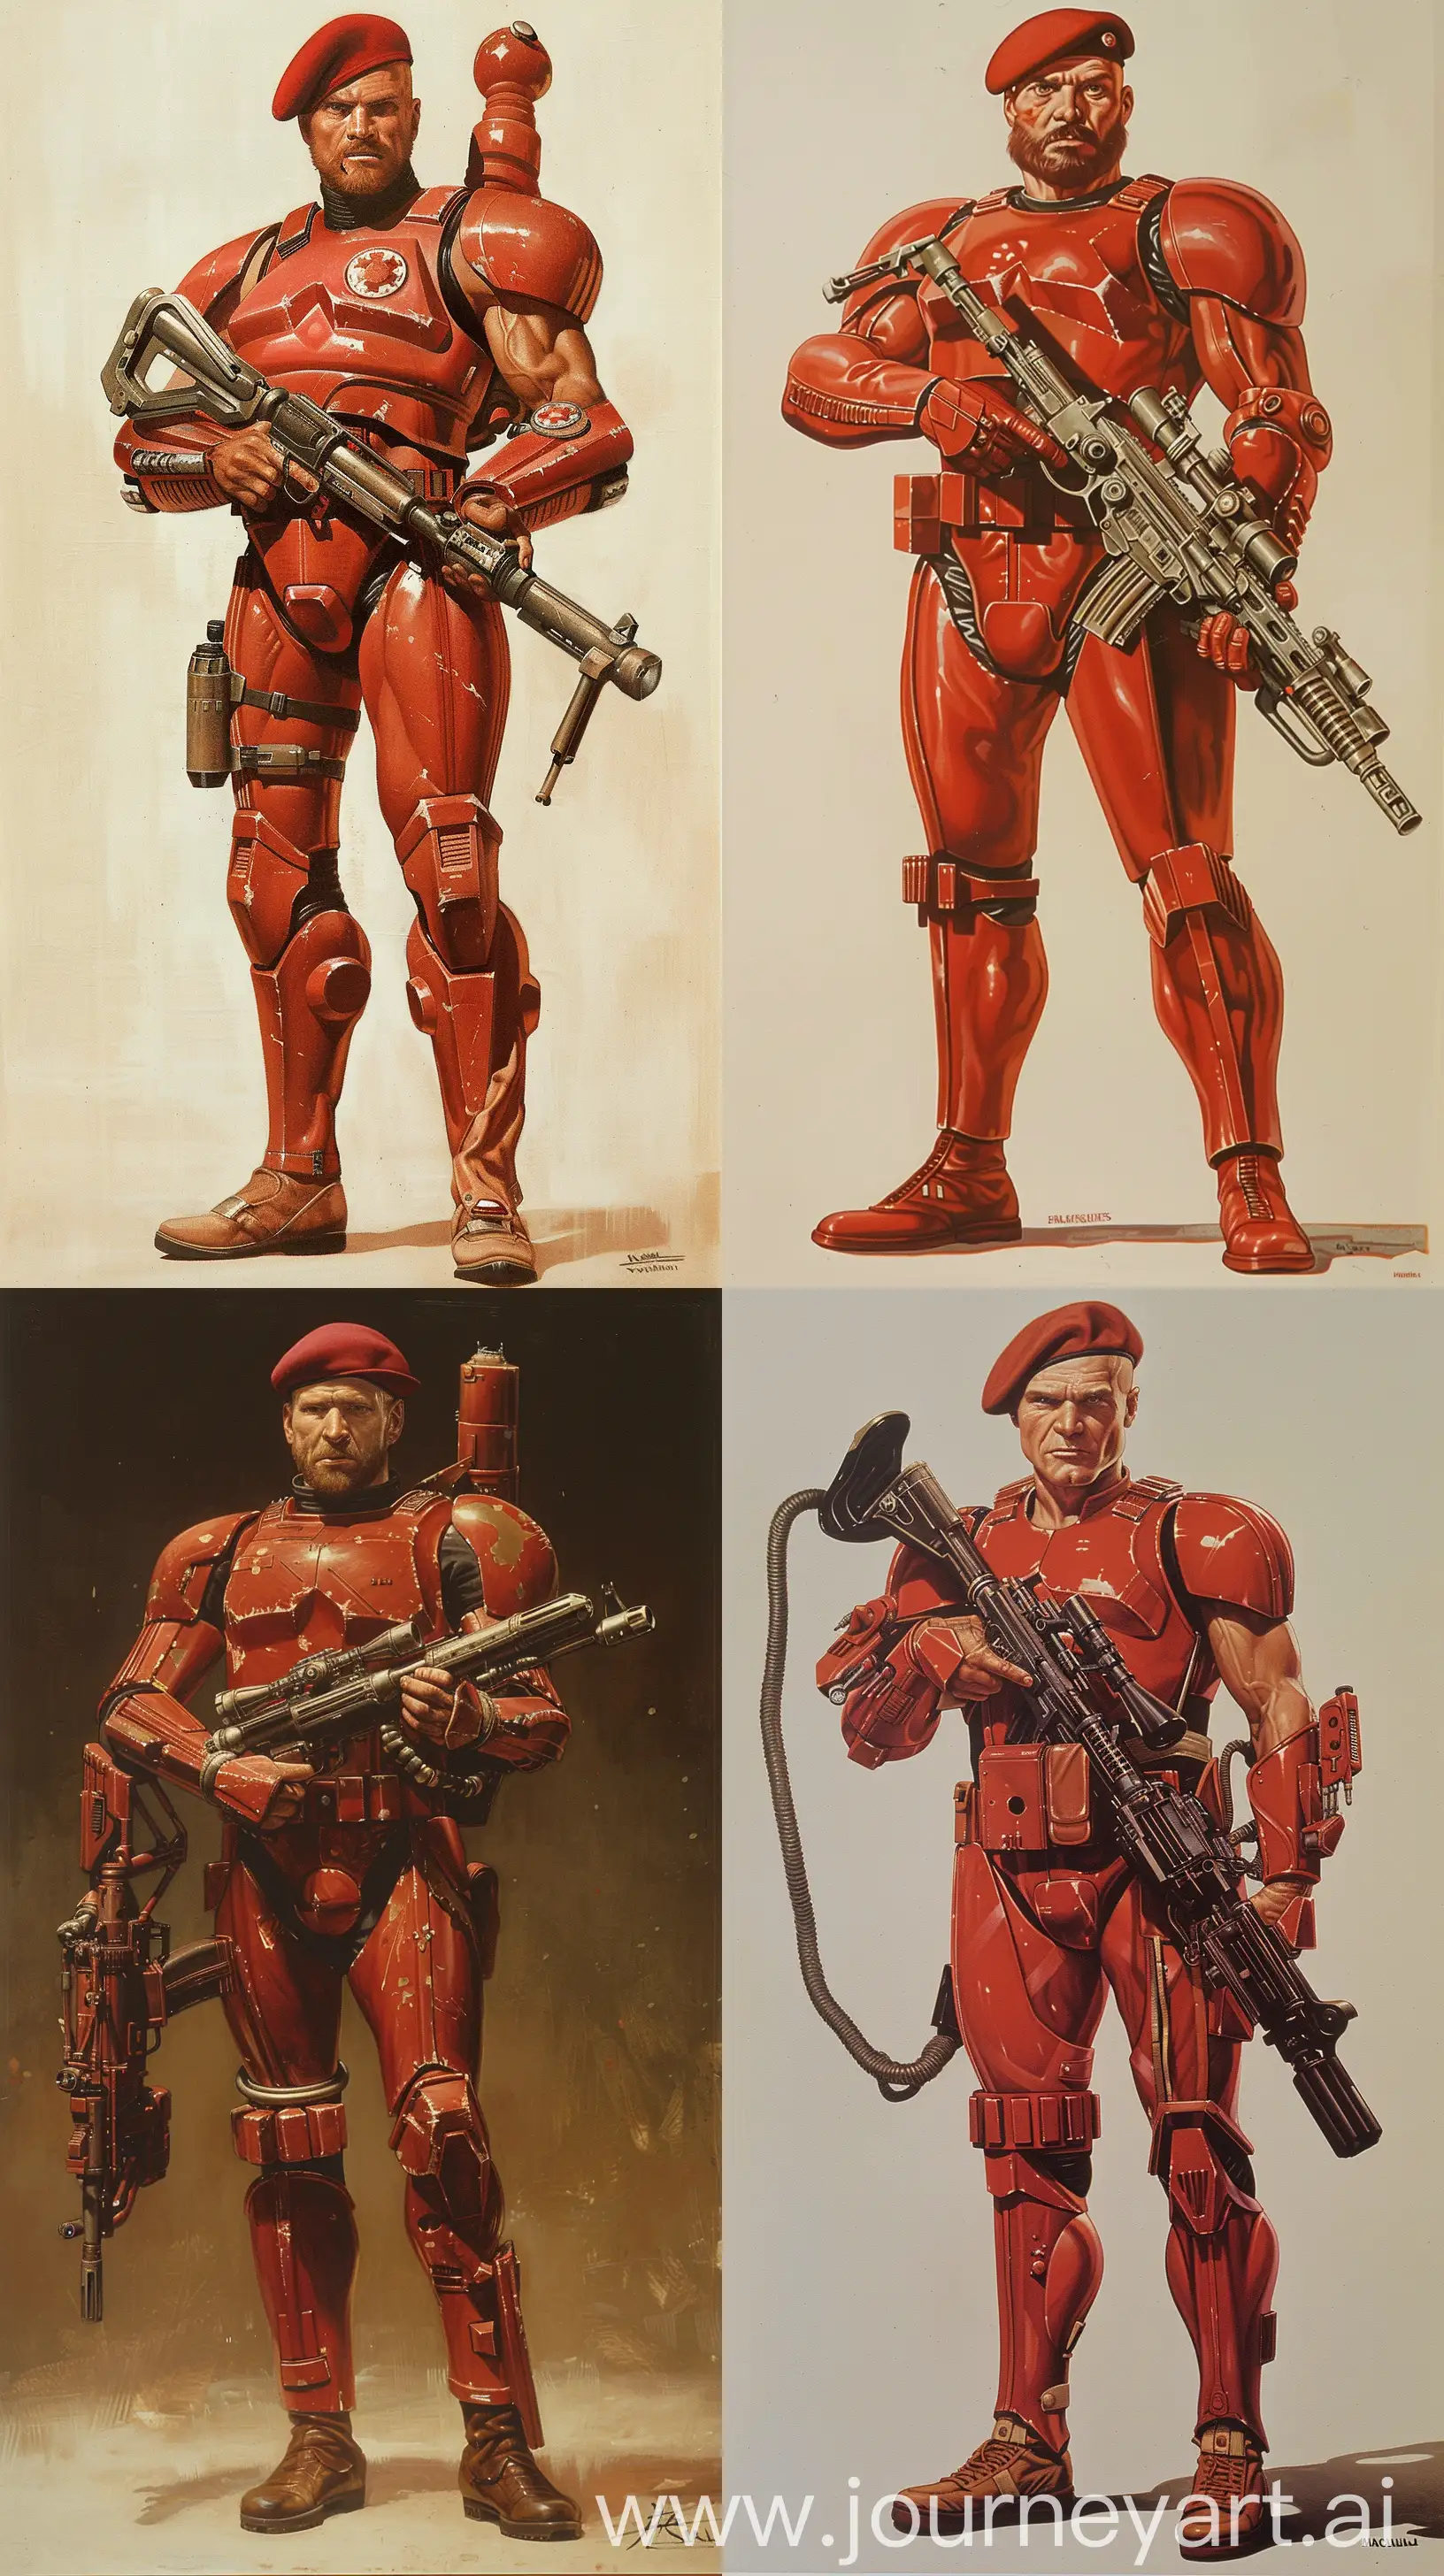 A tall bald man(with a brown beard) wearing a red military beret and wearing a suit of red stormtrooper armor and holding a futuristic metal rifle painted by Ralph McQuarrie. entire body shown. feet shown. strong features. tall frame. retro science fiction art style. --ar 9:16

